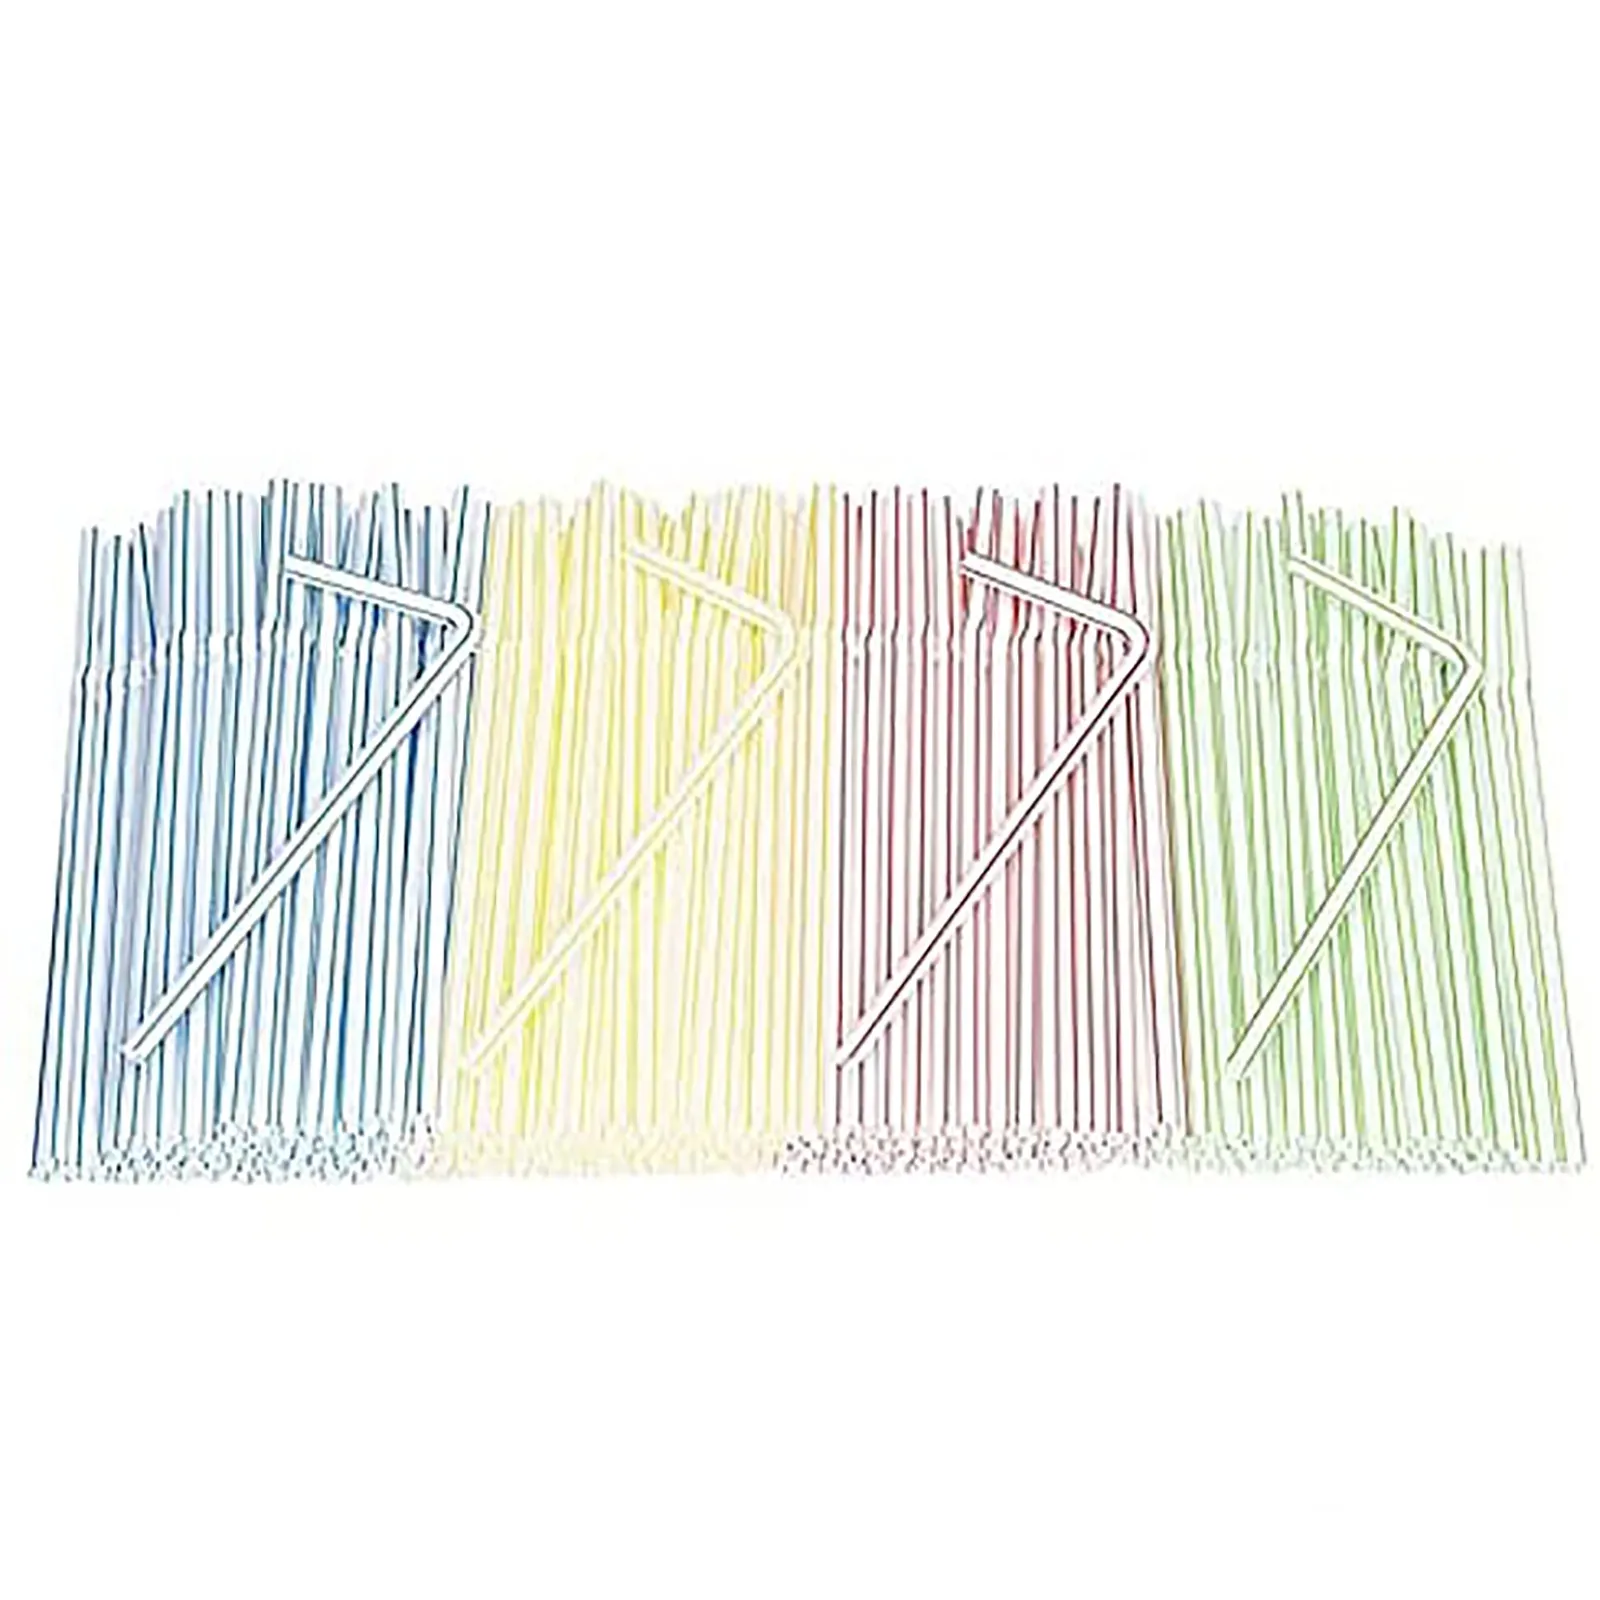 Details about   200/400 pcs Plastic Drinking Straws 8 Inches Long Multi-Colored Striped Bedable 